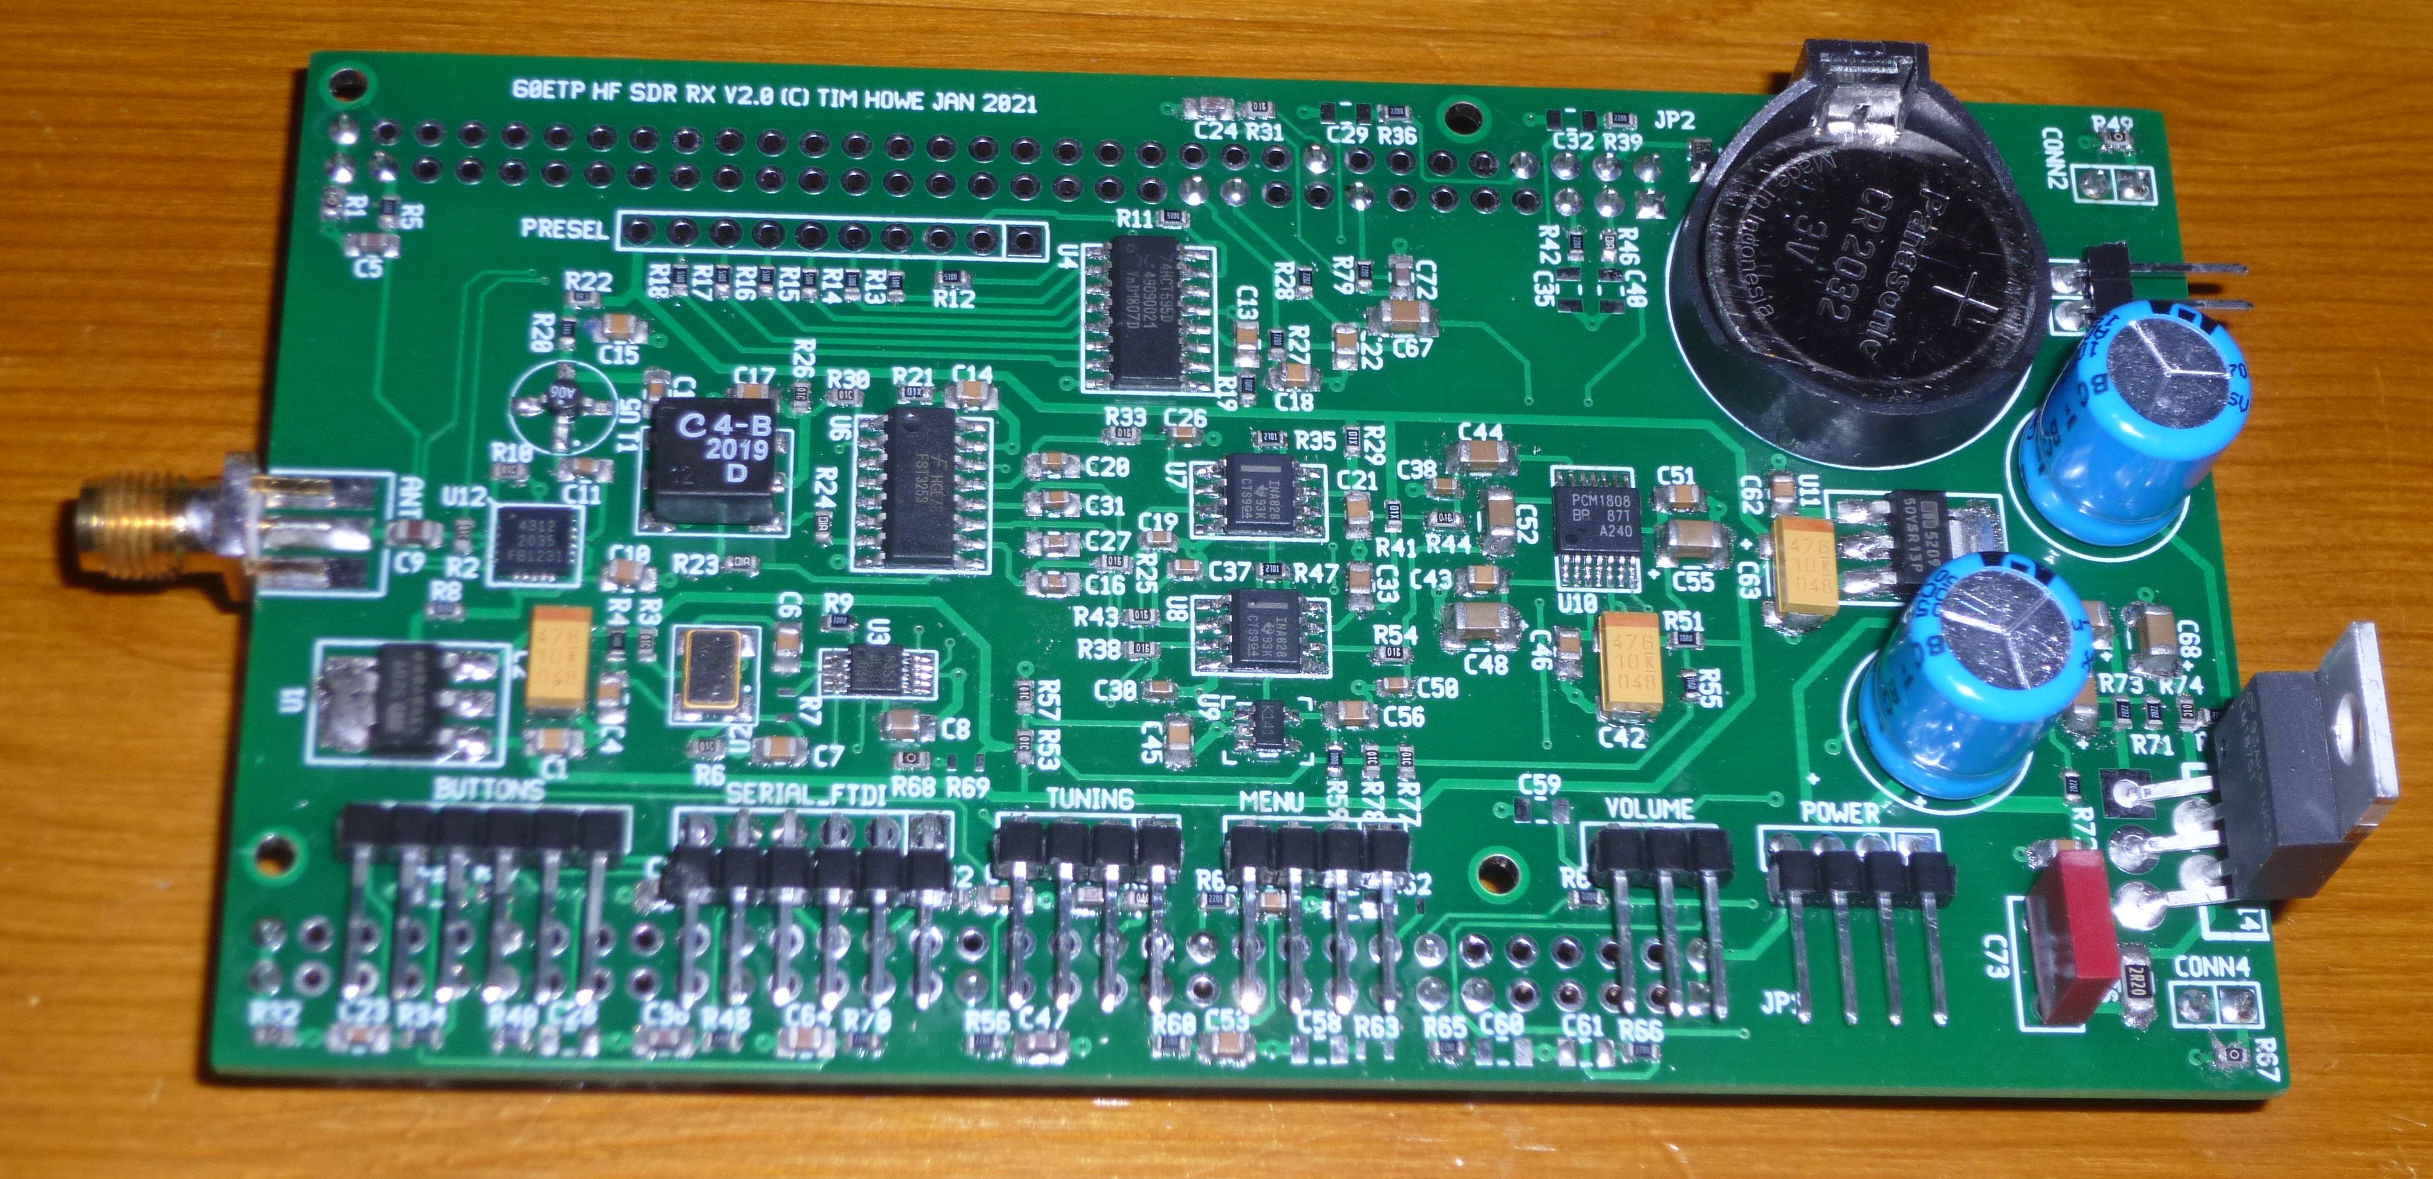 G0ETP V2 SDR Board - Top View